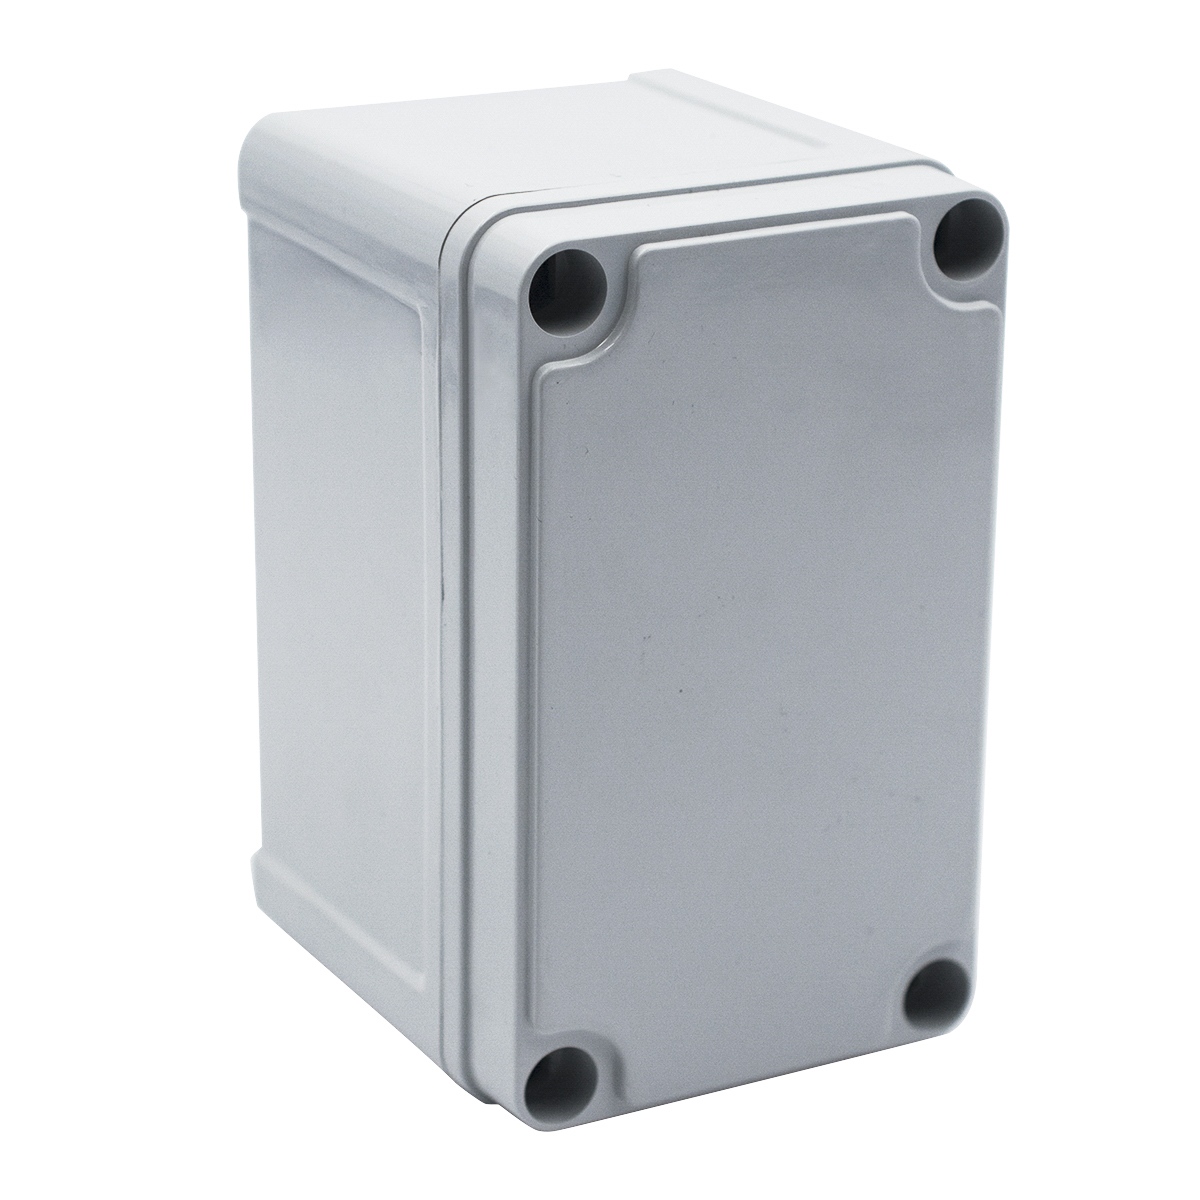 ABS Plastic Electrical Junction Box Case Waterproof Plastic Box 13x8x8.5 cm  factory and suppliers